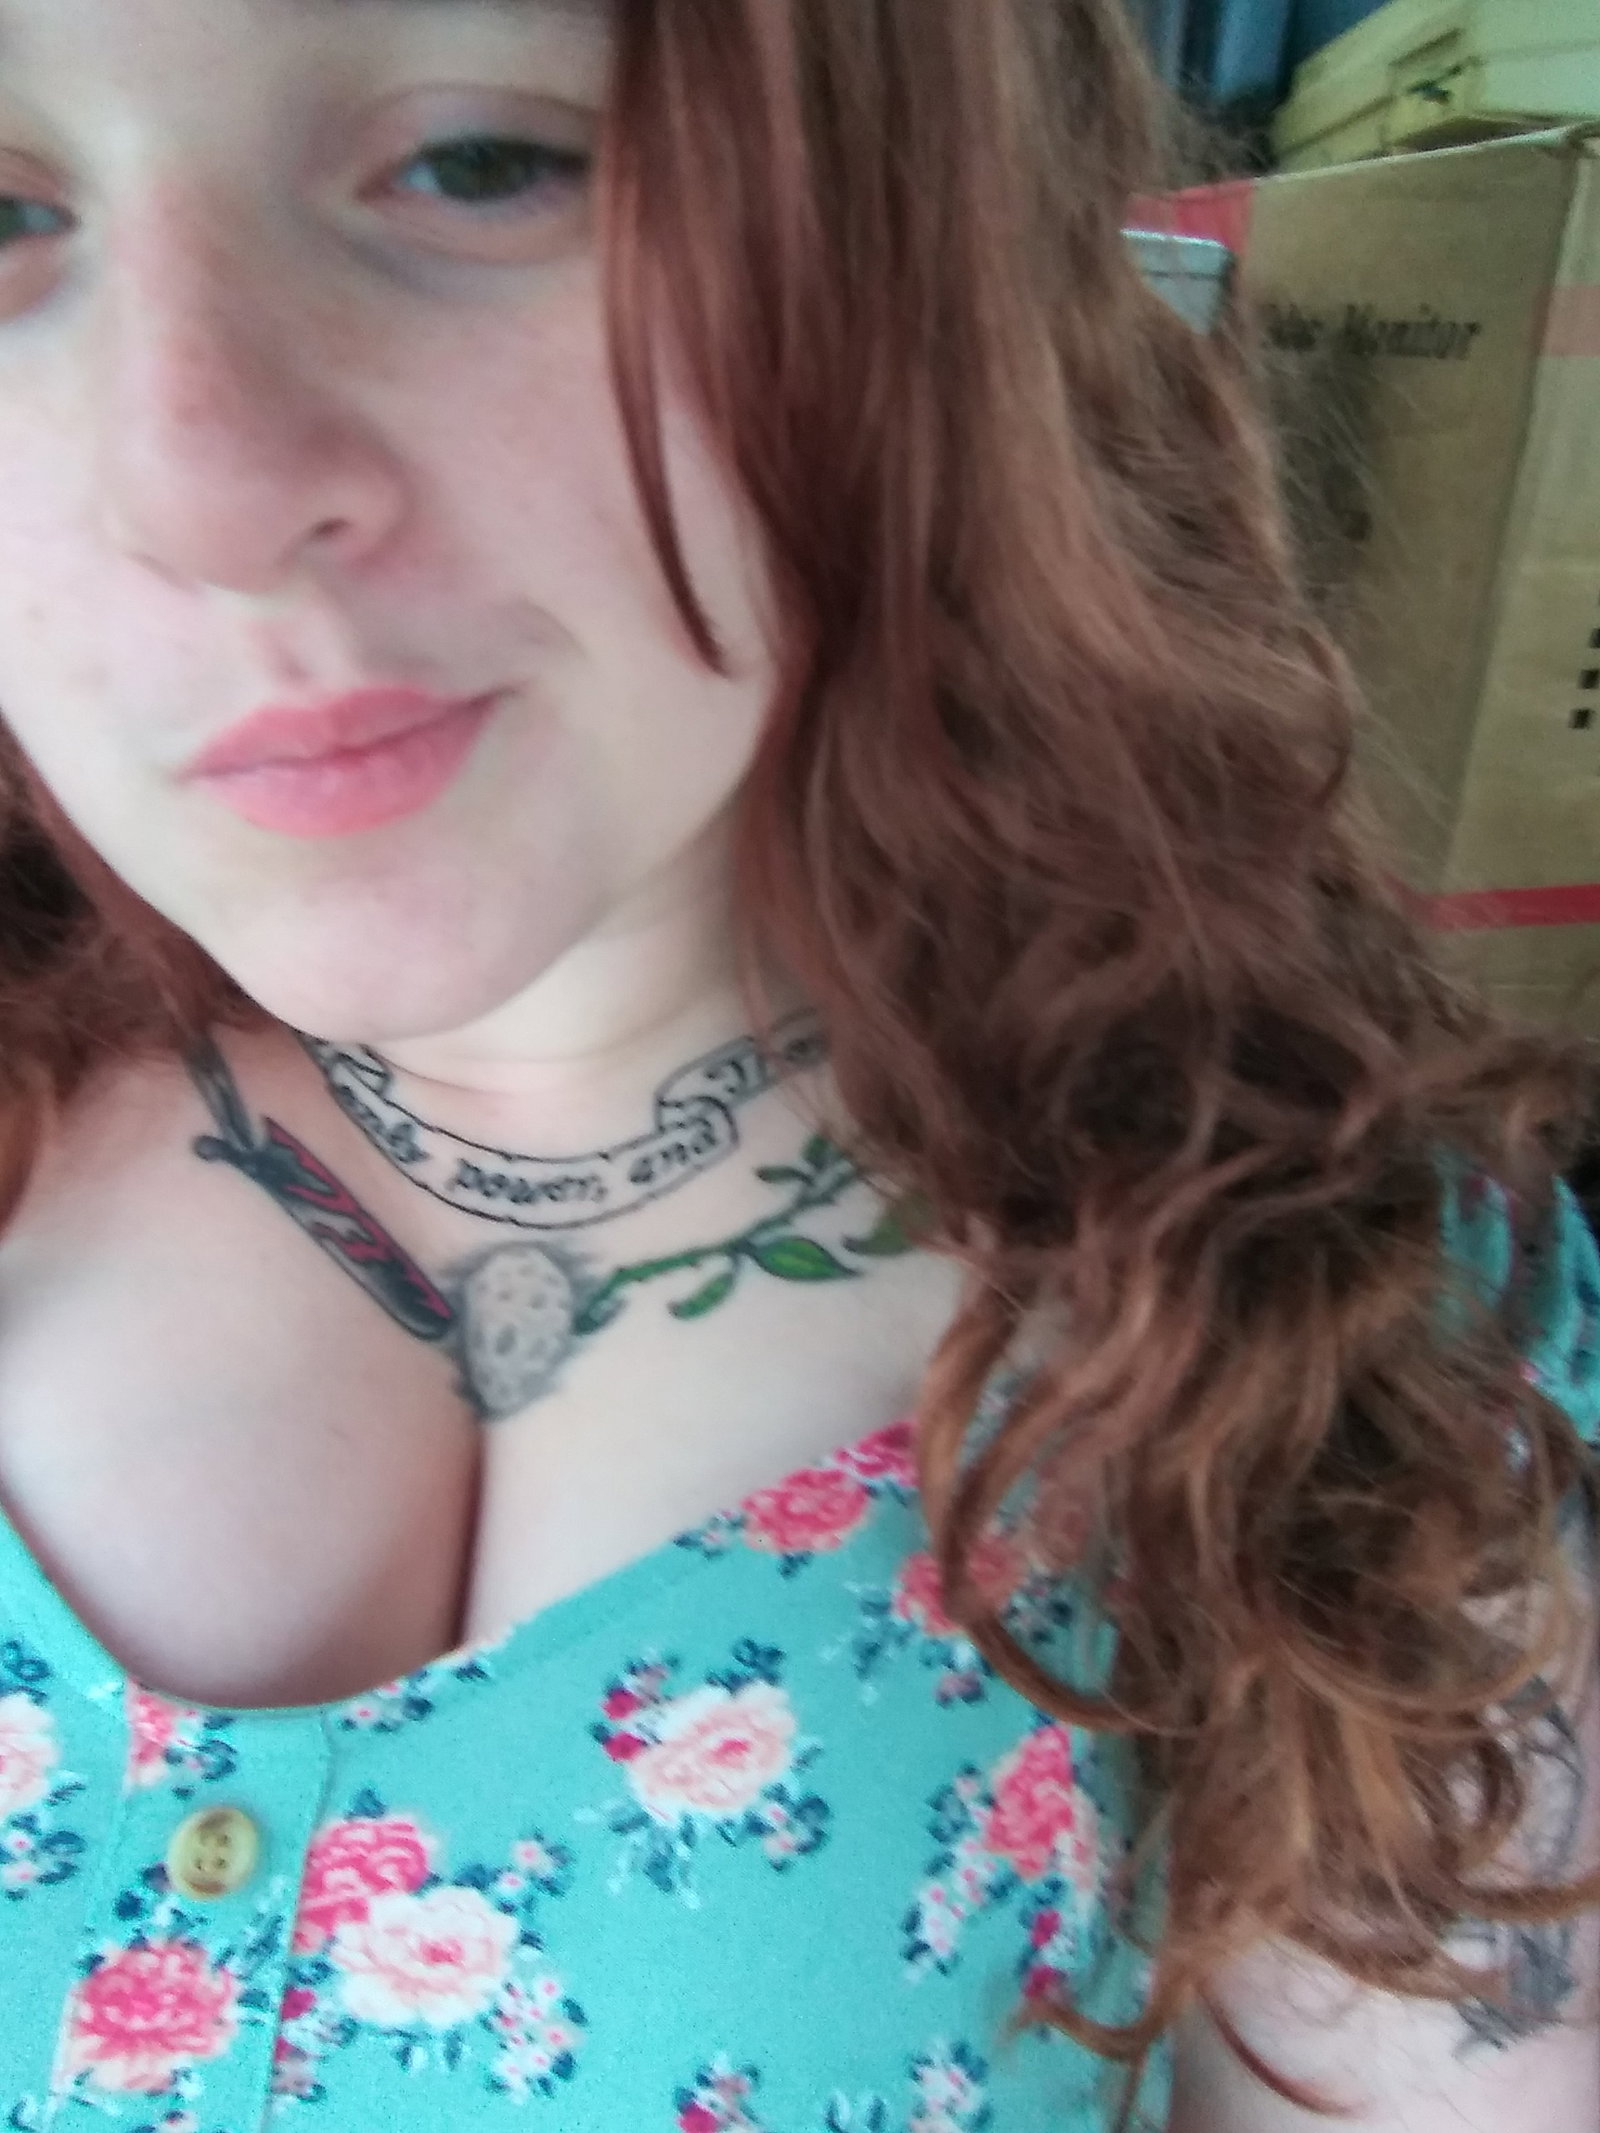 Photo by Nerdy4kitty20 with the username @Nerdy4kitty20, who is a star user,  June 18, 2019 at 1:32 AM and the text says 'I have a horribly raging headache, fix it by sending me tributes since you can't fix it by giving me a good fuck! 
Venmo / @nerdykitty420
Cashapp / $nerdykitty420'